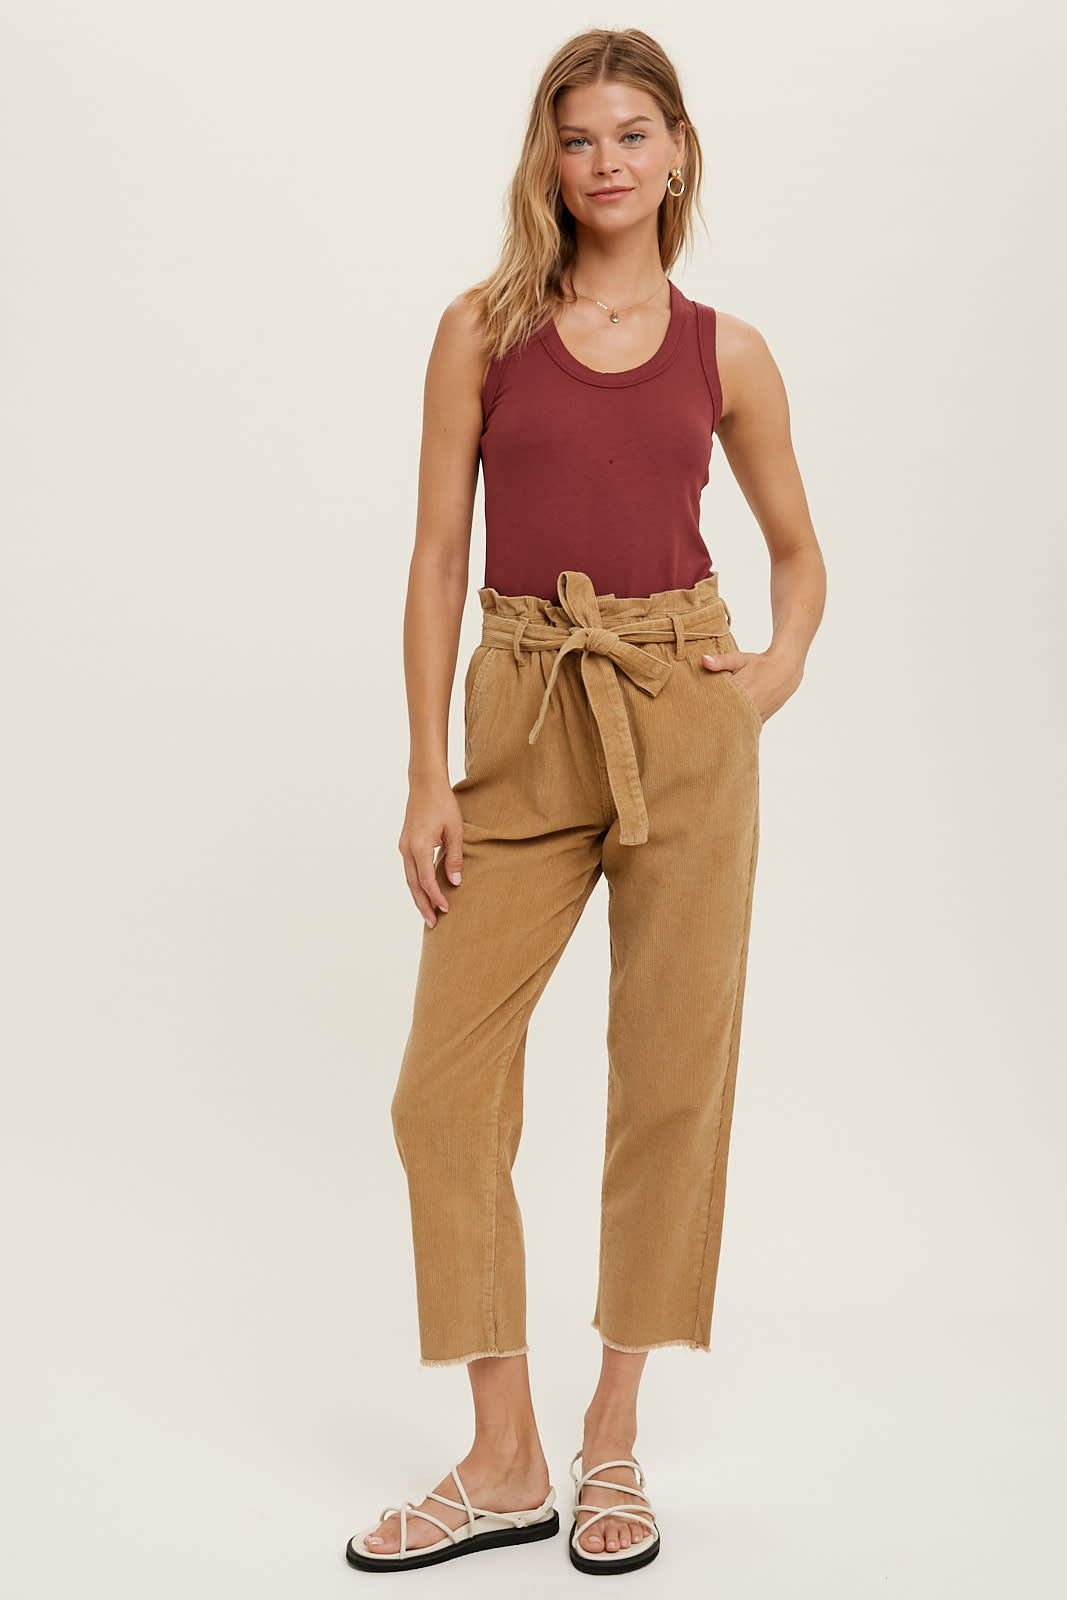 High-Waisted Belted Paper Bag Pants for Women Business Casual Trousers with  Pockets 